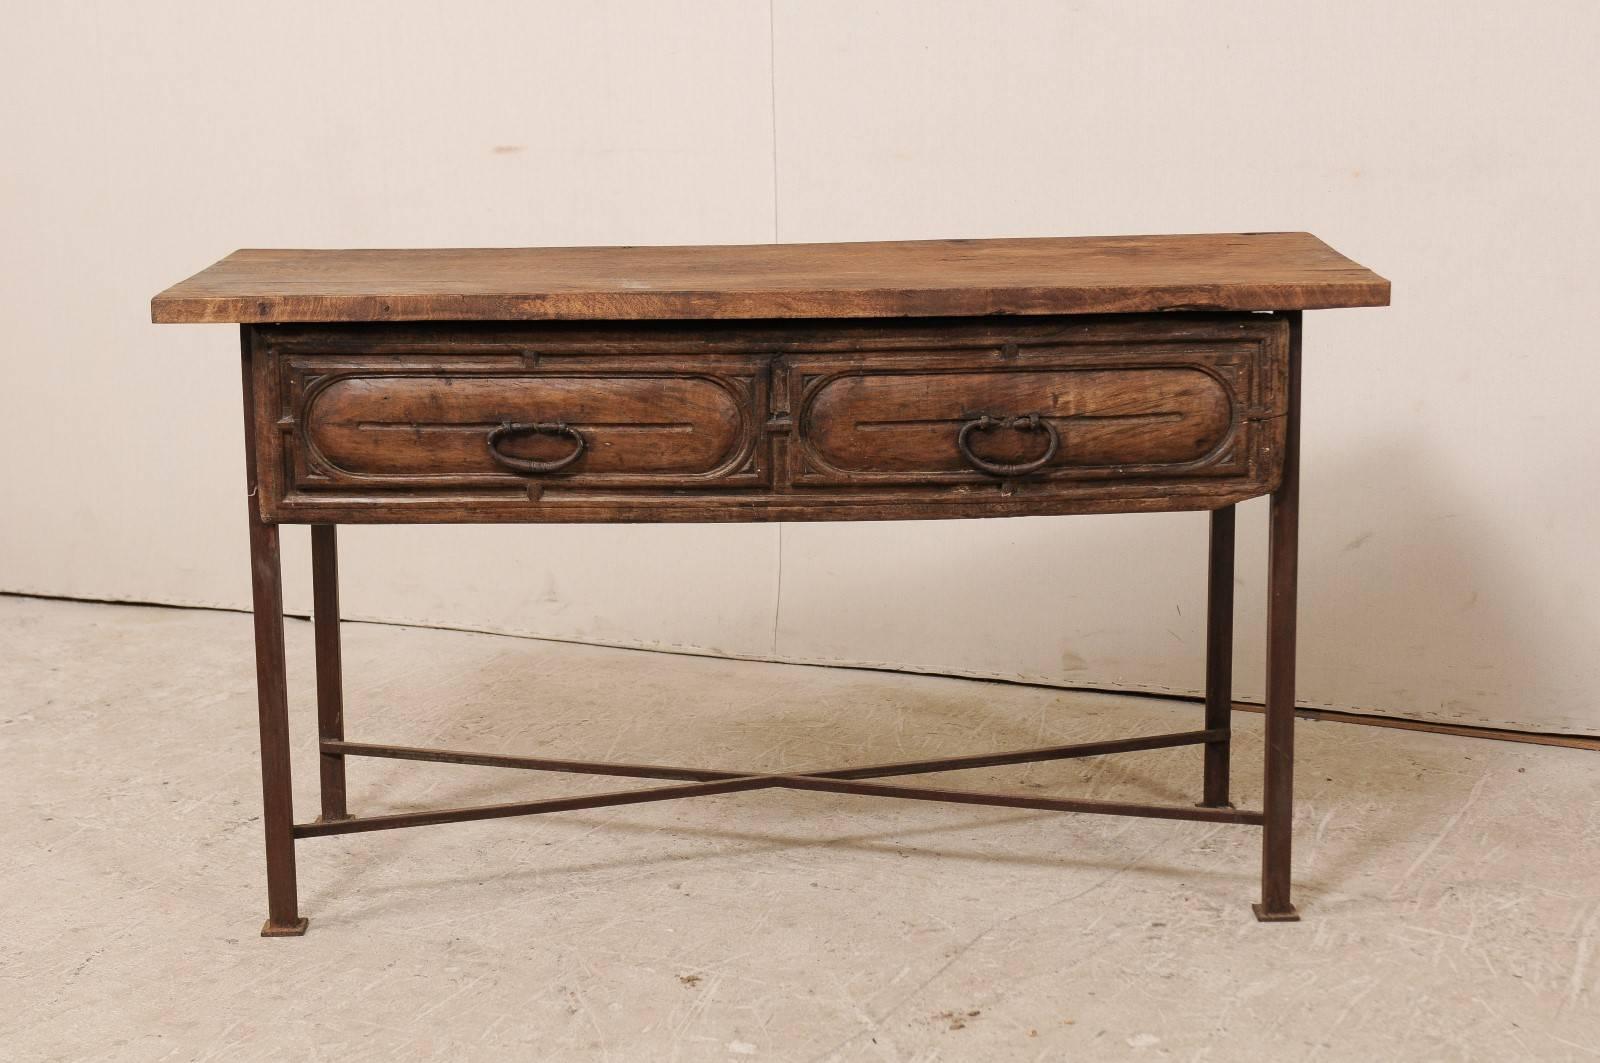 Carved 18th Century Spanish Rustic Wood and Iron Console Table with Spacious Drawer